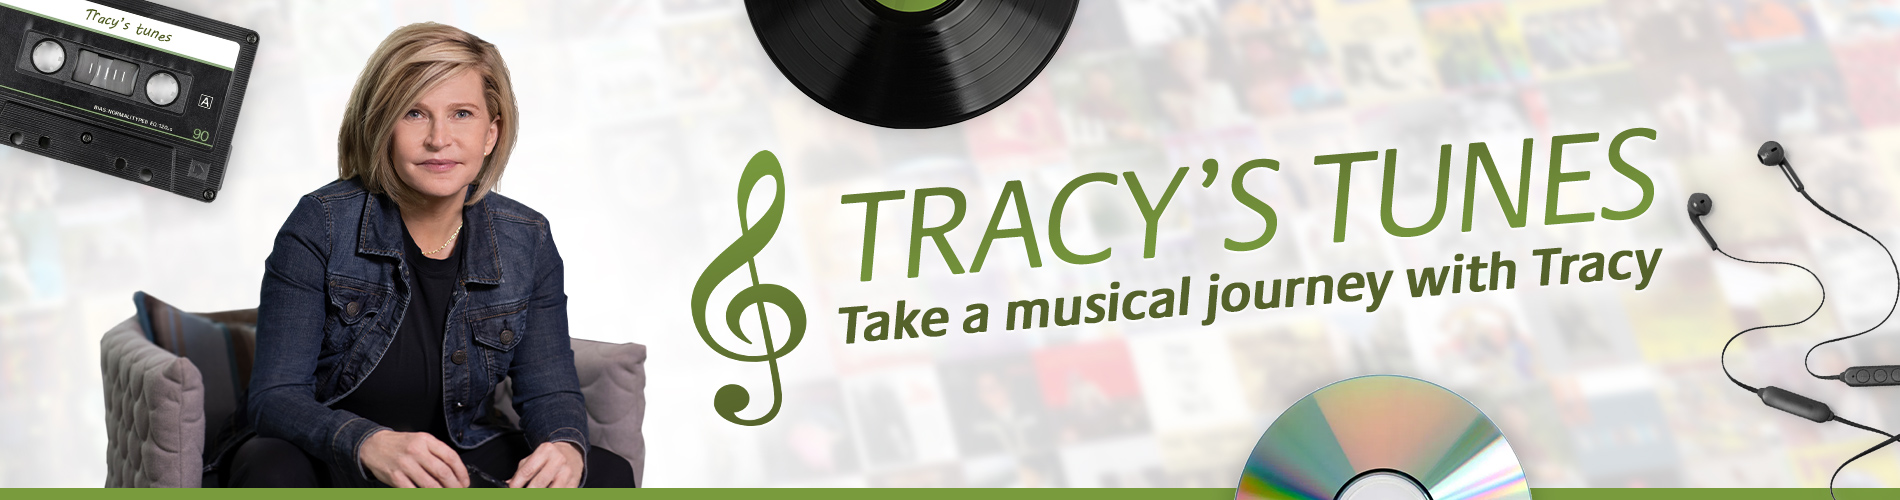 Tracy's Tunes - Take a musical journey with our ELT